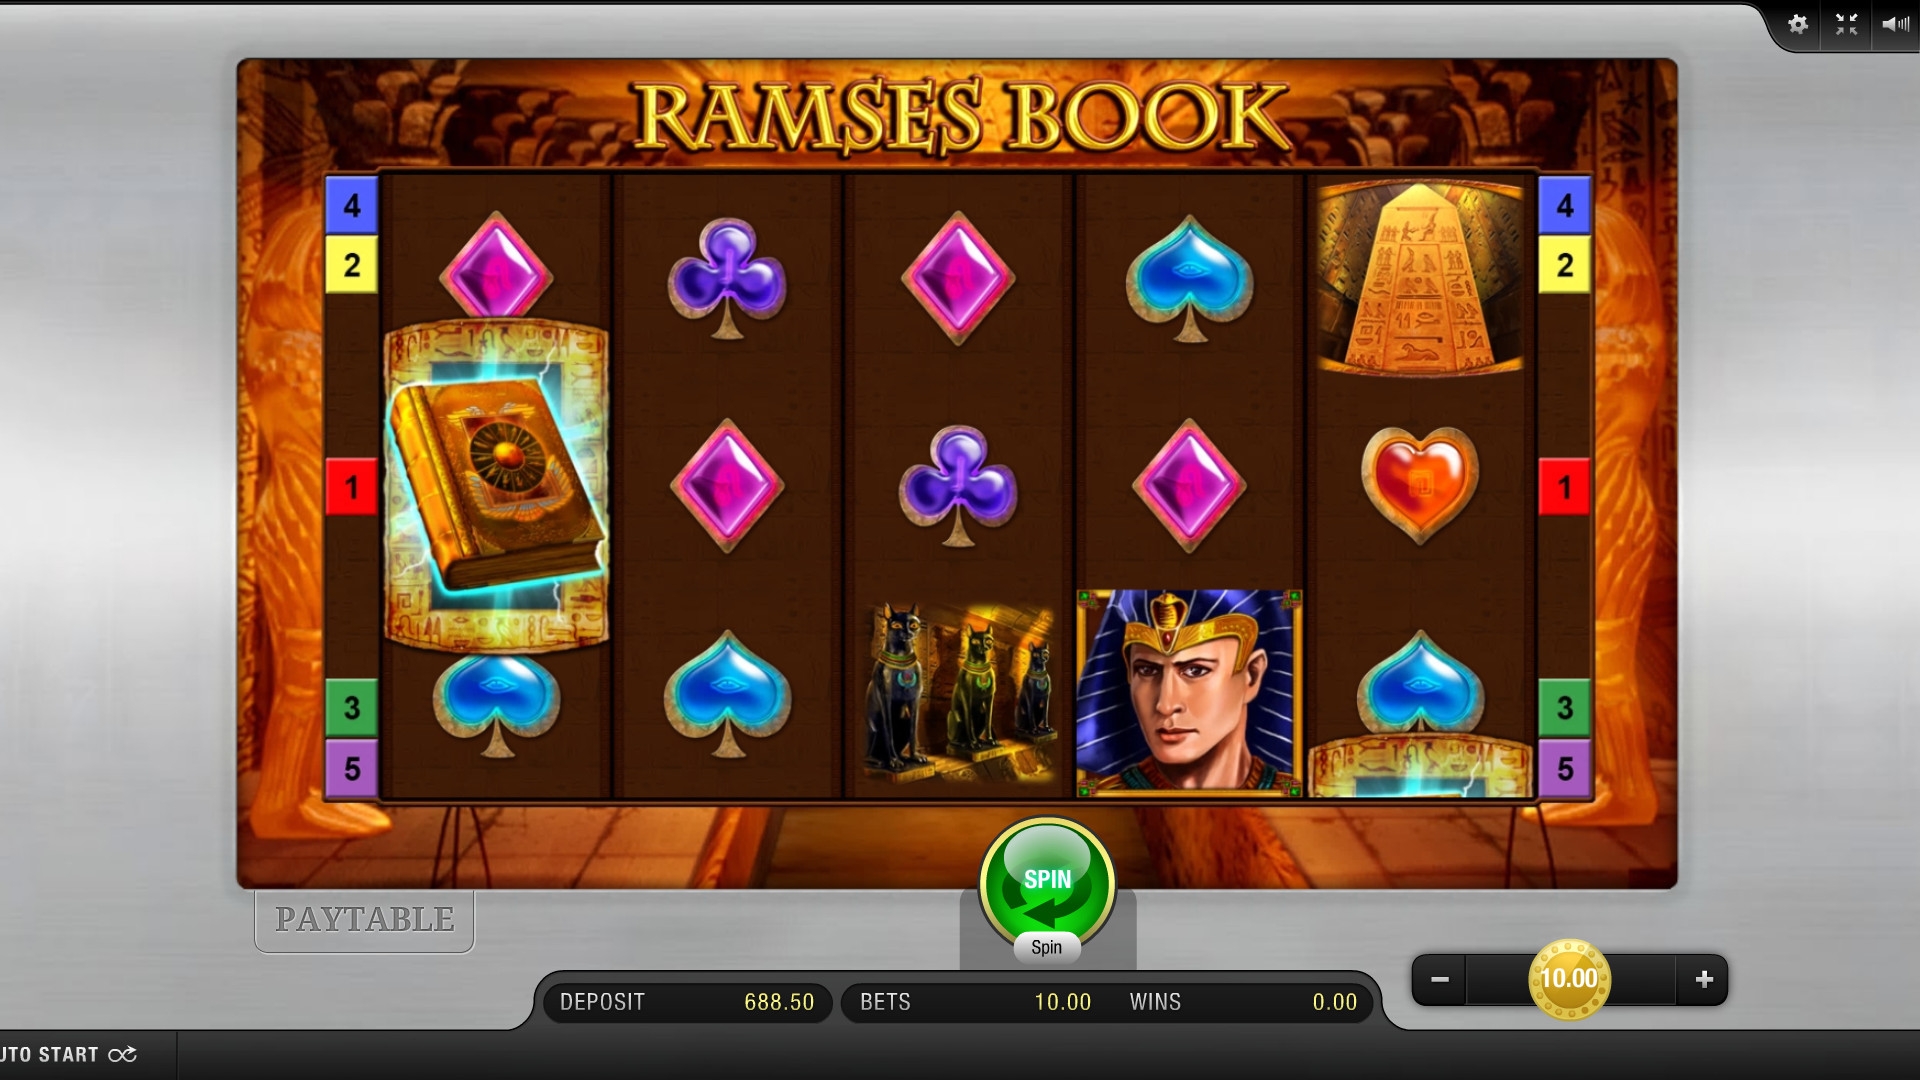 Ramses Book (Ramses Book) from category Slots